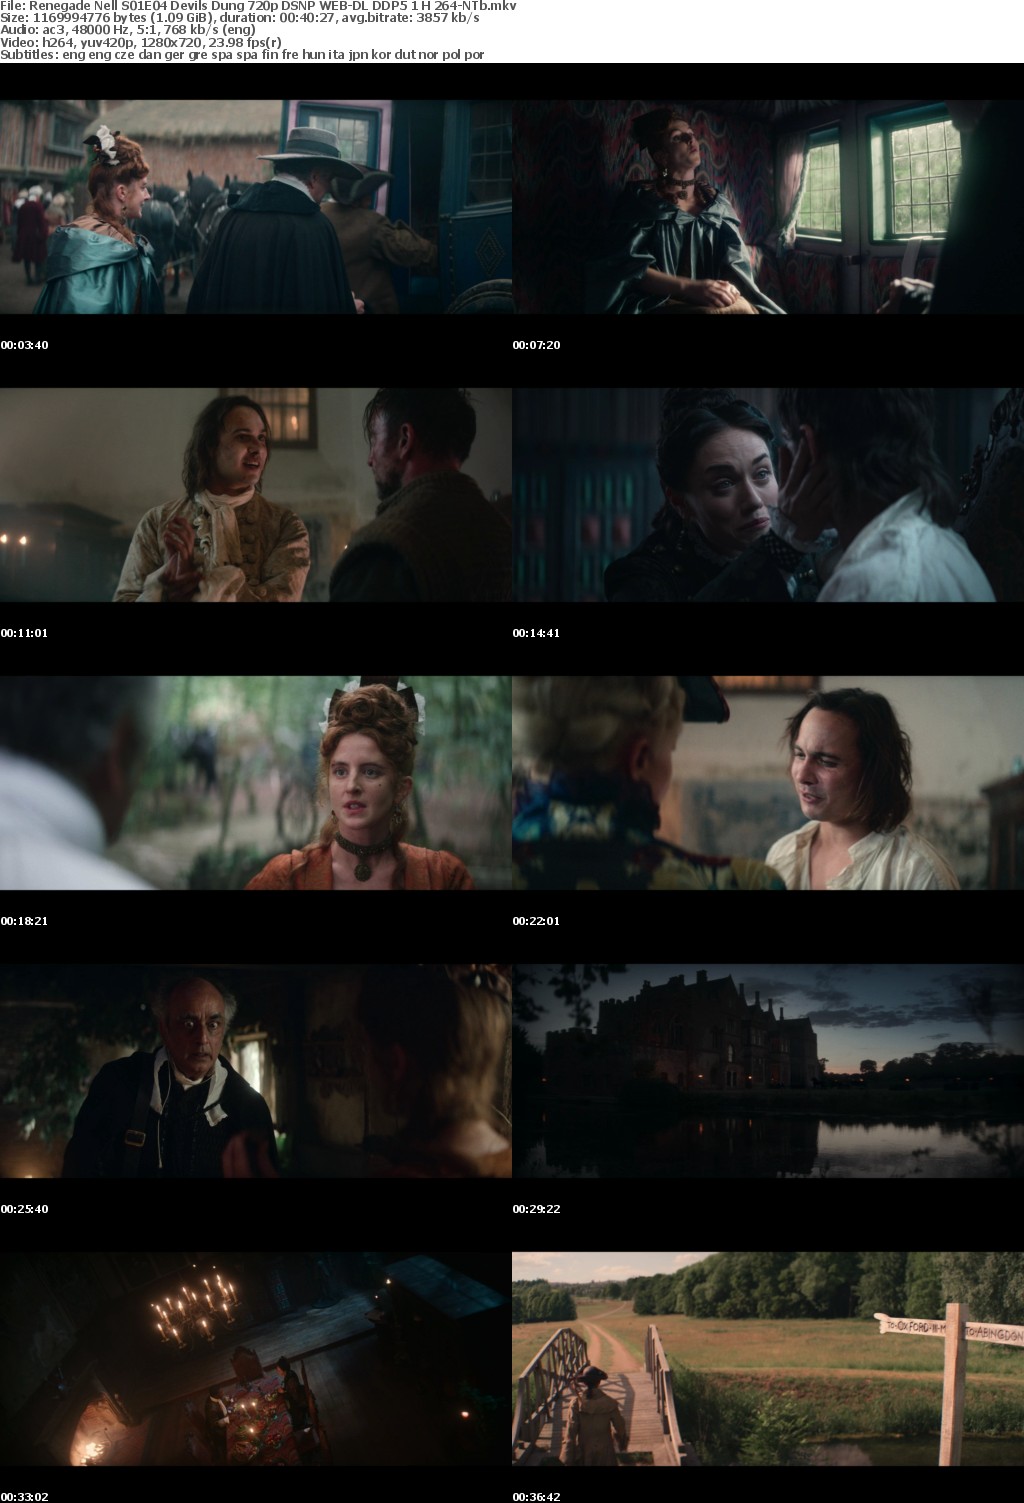 Renegade Nell S01E04 Devils Dung 720p DSNP WEB-DL DDP5 1 H 264-NTb